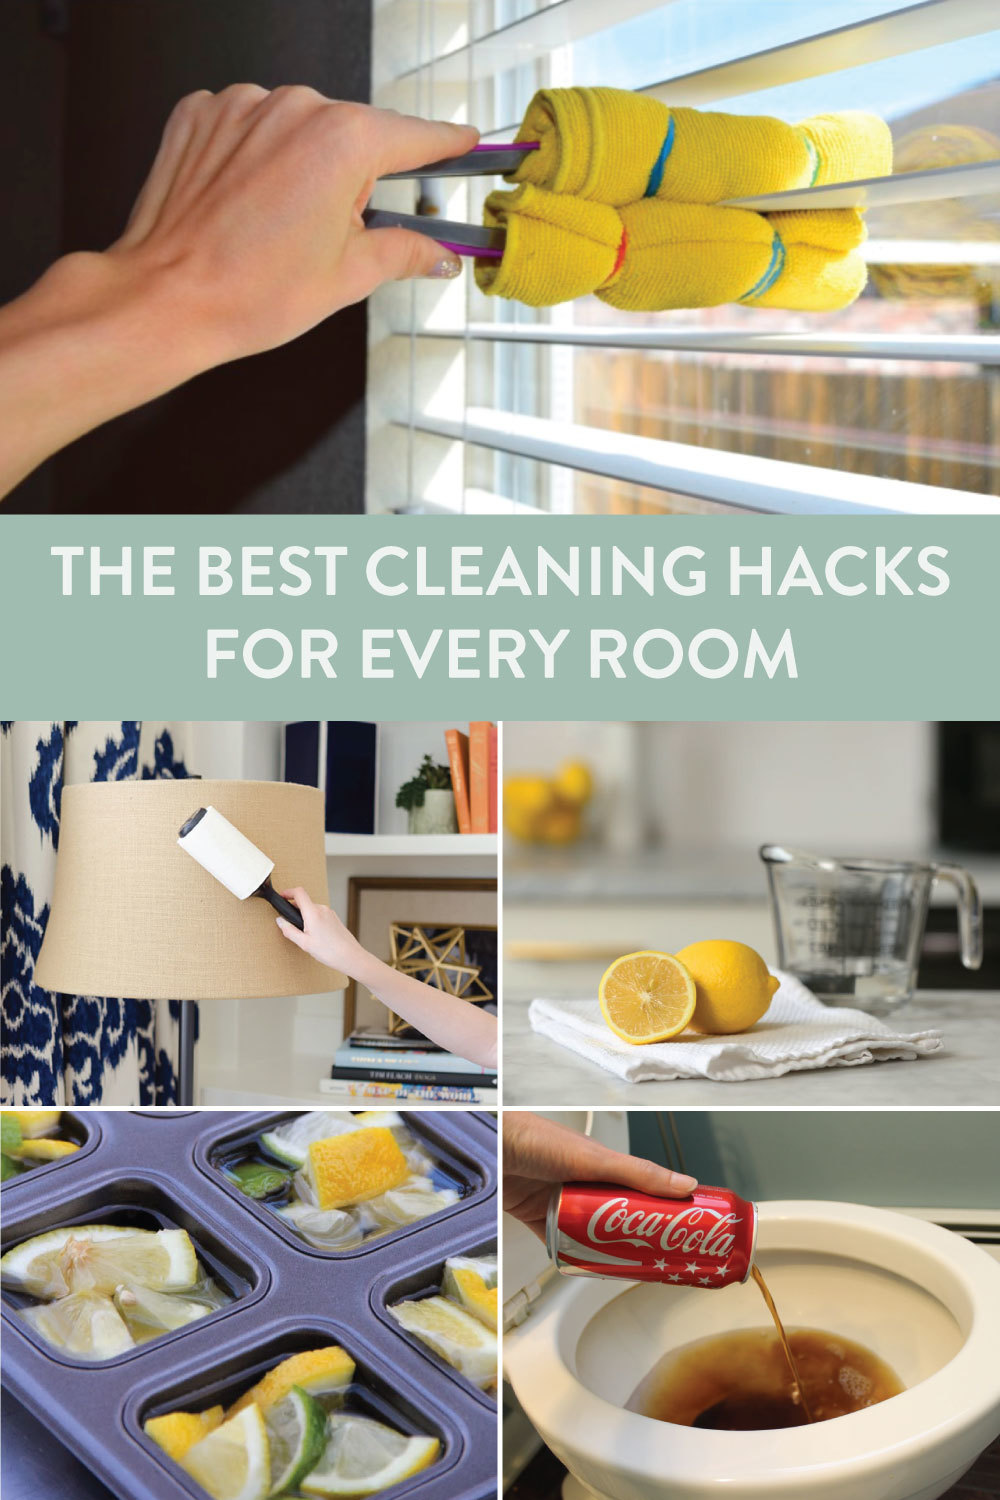 Different hacks for cleaning are displayed.